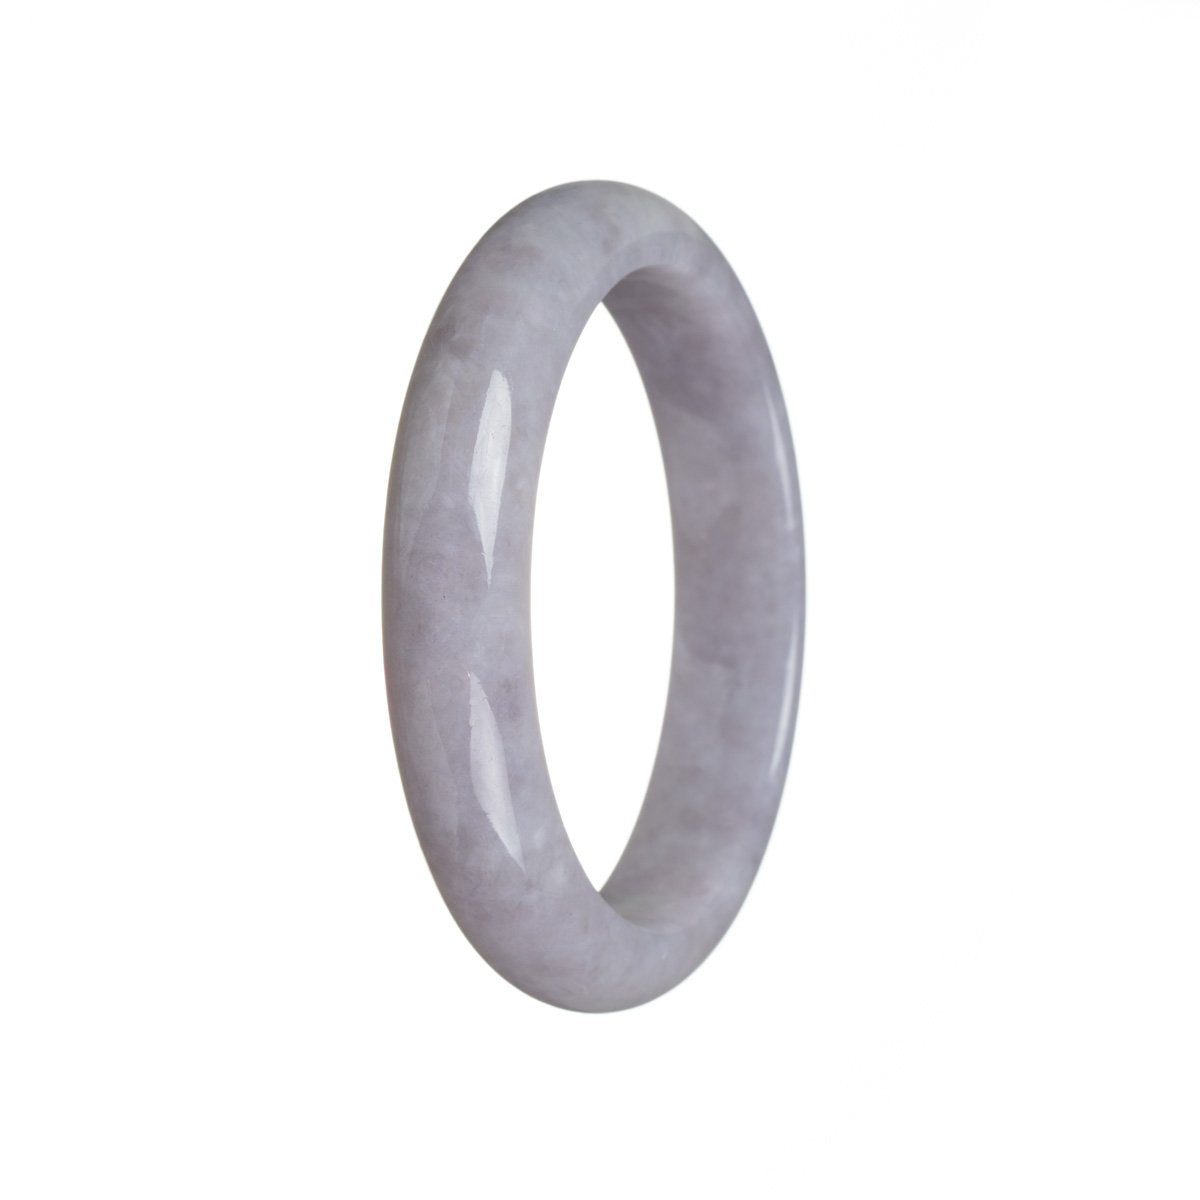 An elegant lavender jade bangle bracelet with a half moon shape, made from high-quality Grade A traditional jade. The perfect accessory to add a touch of sophistication to any outfit.